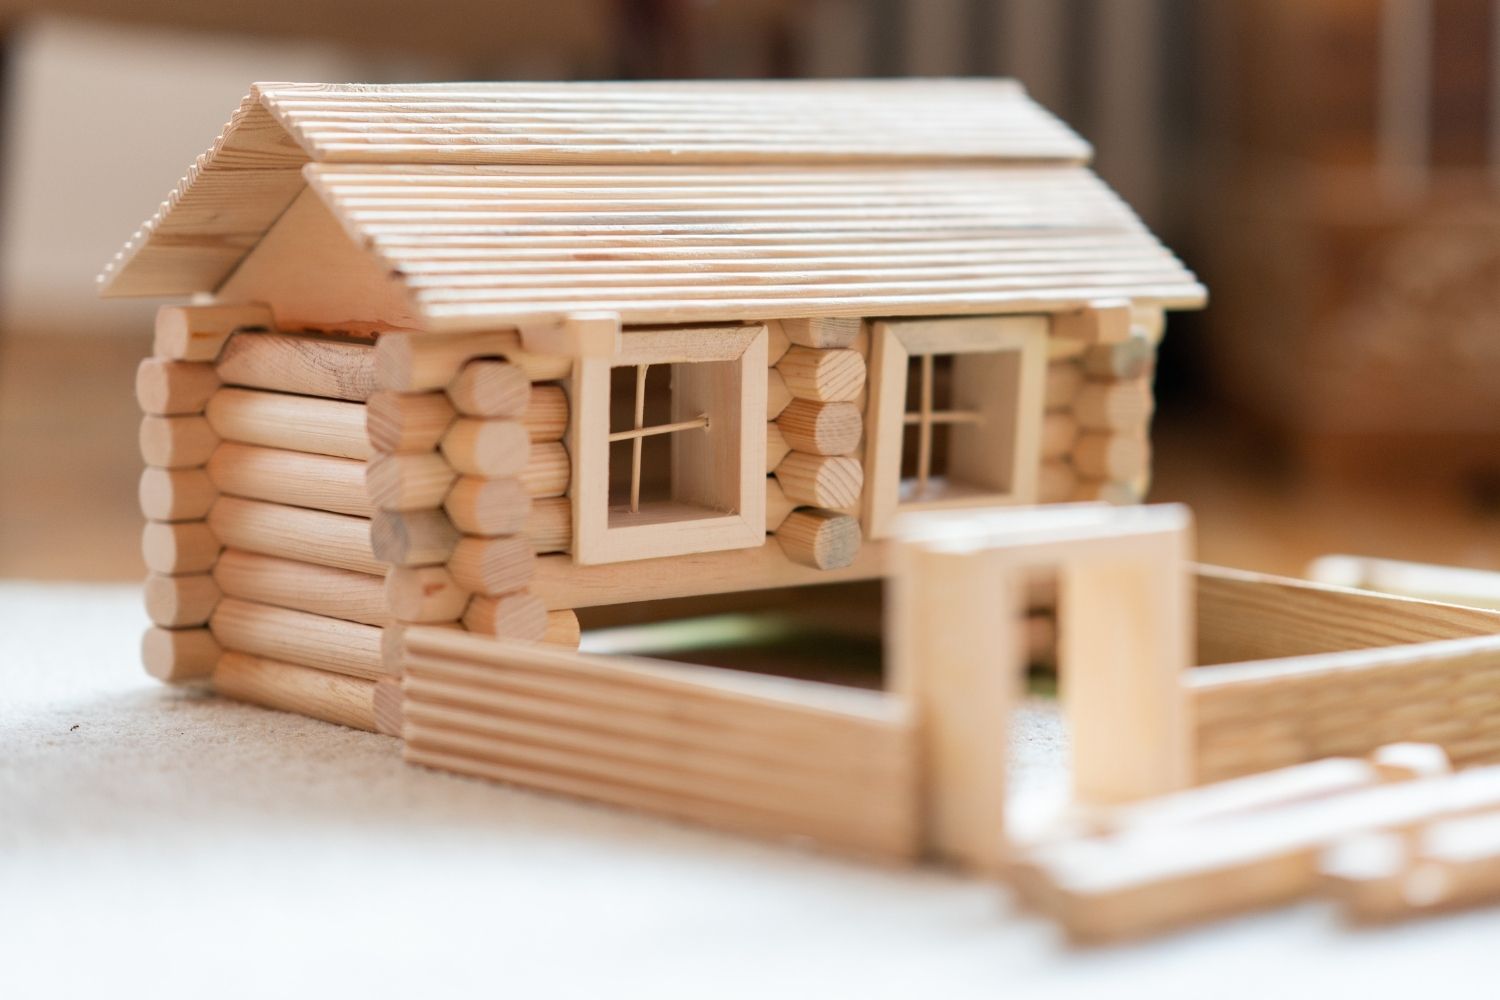 wood building toy shaped into log cabin